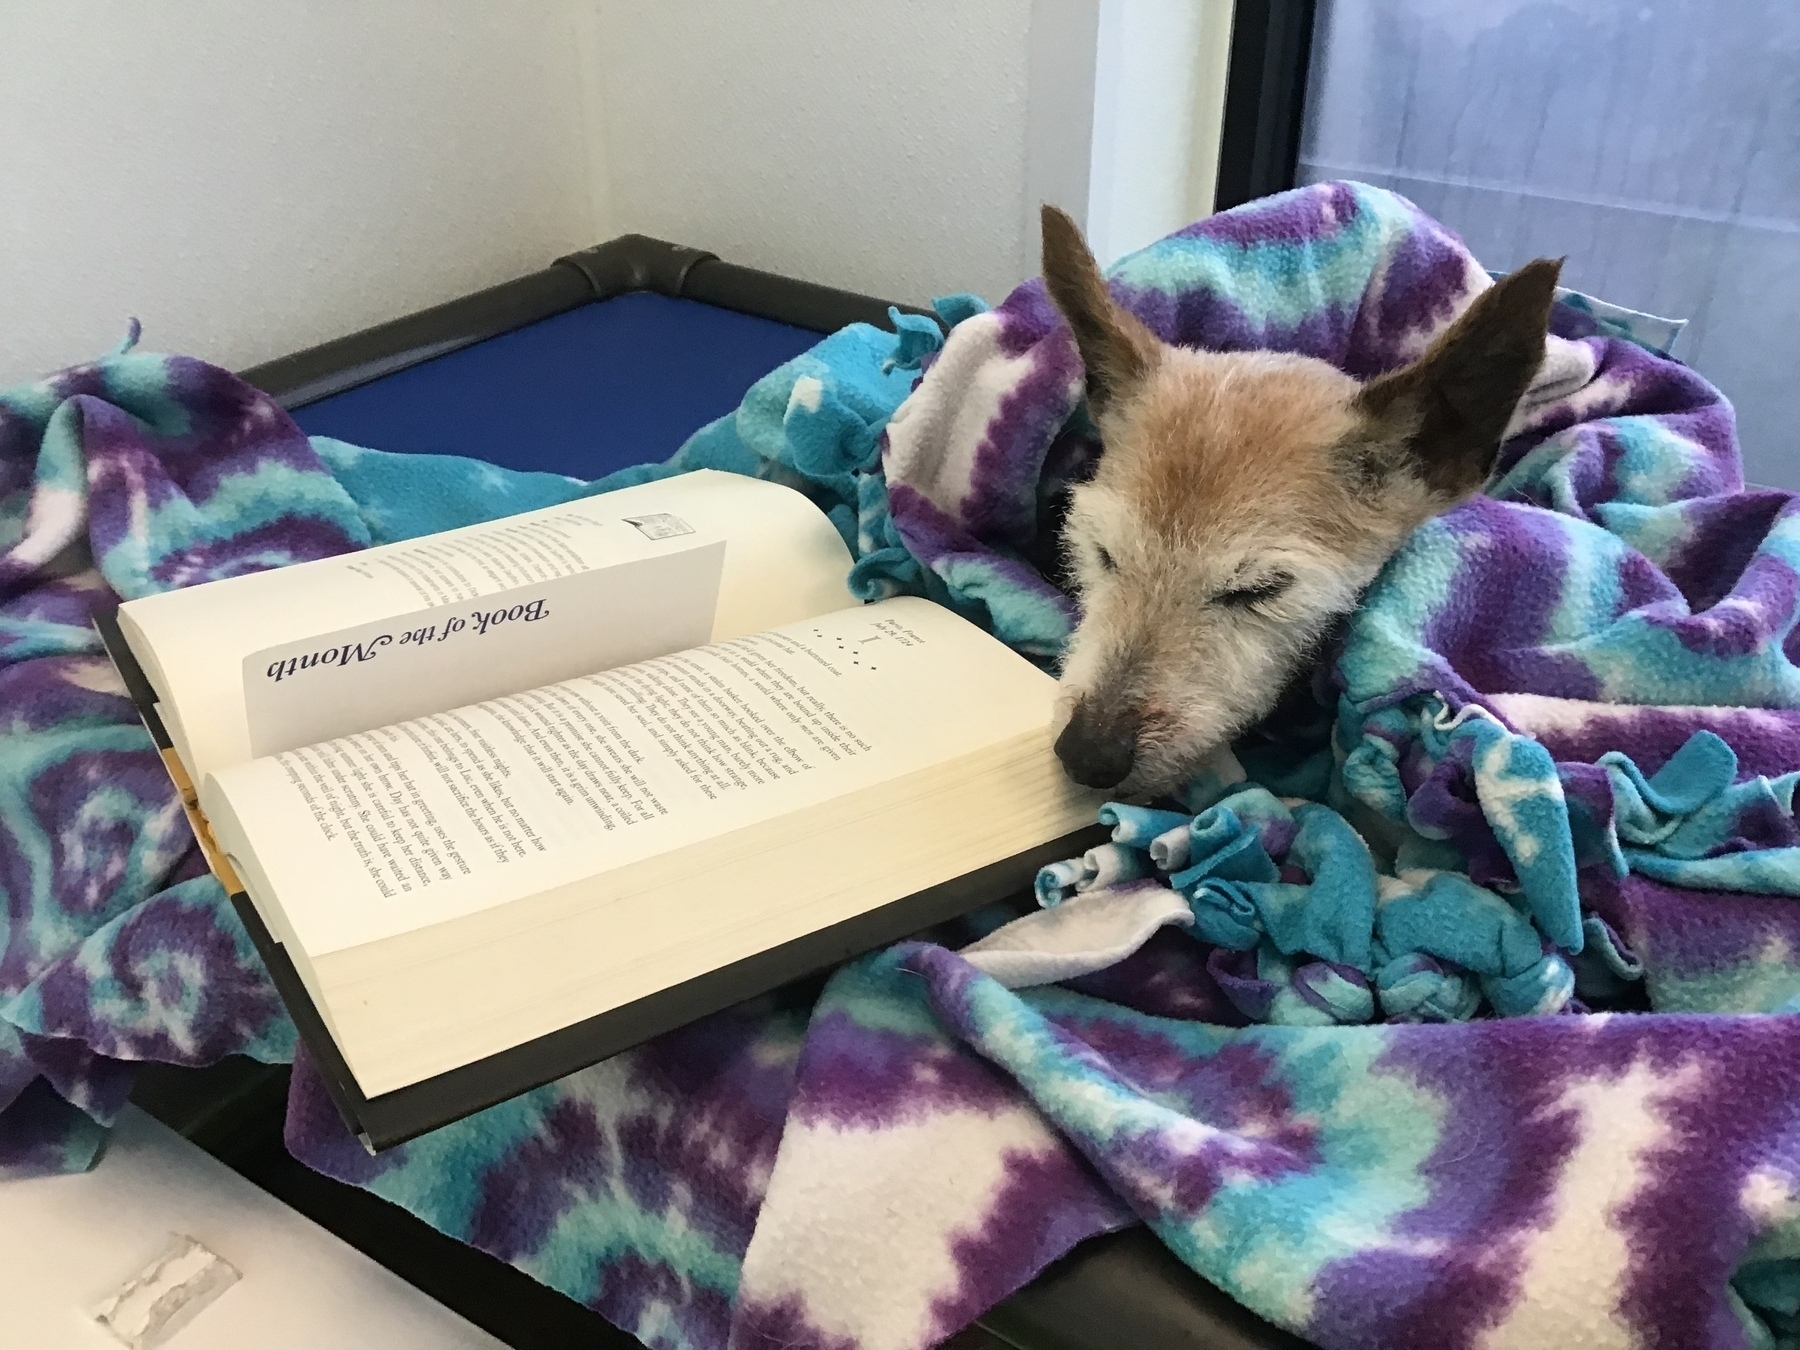 Dog in a blanket with a book posed next to her